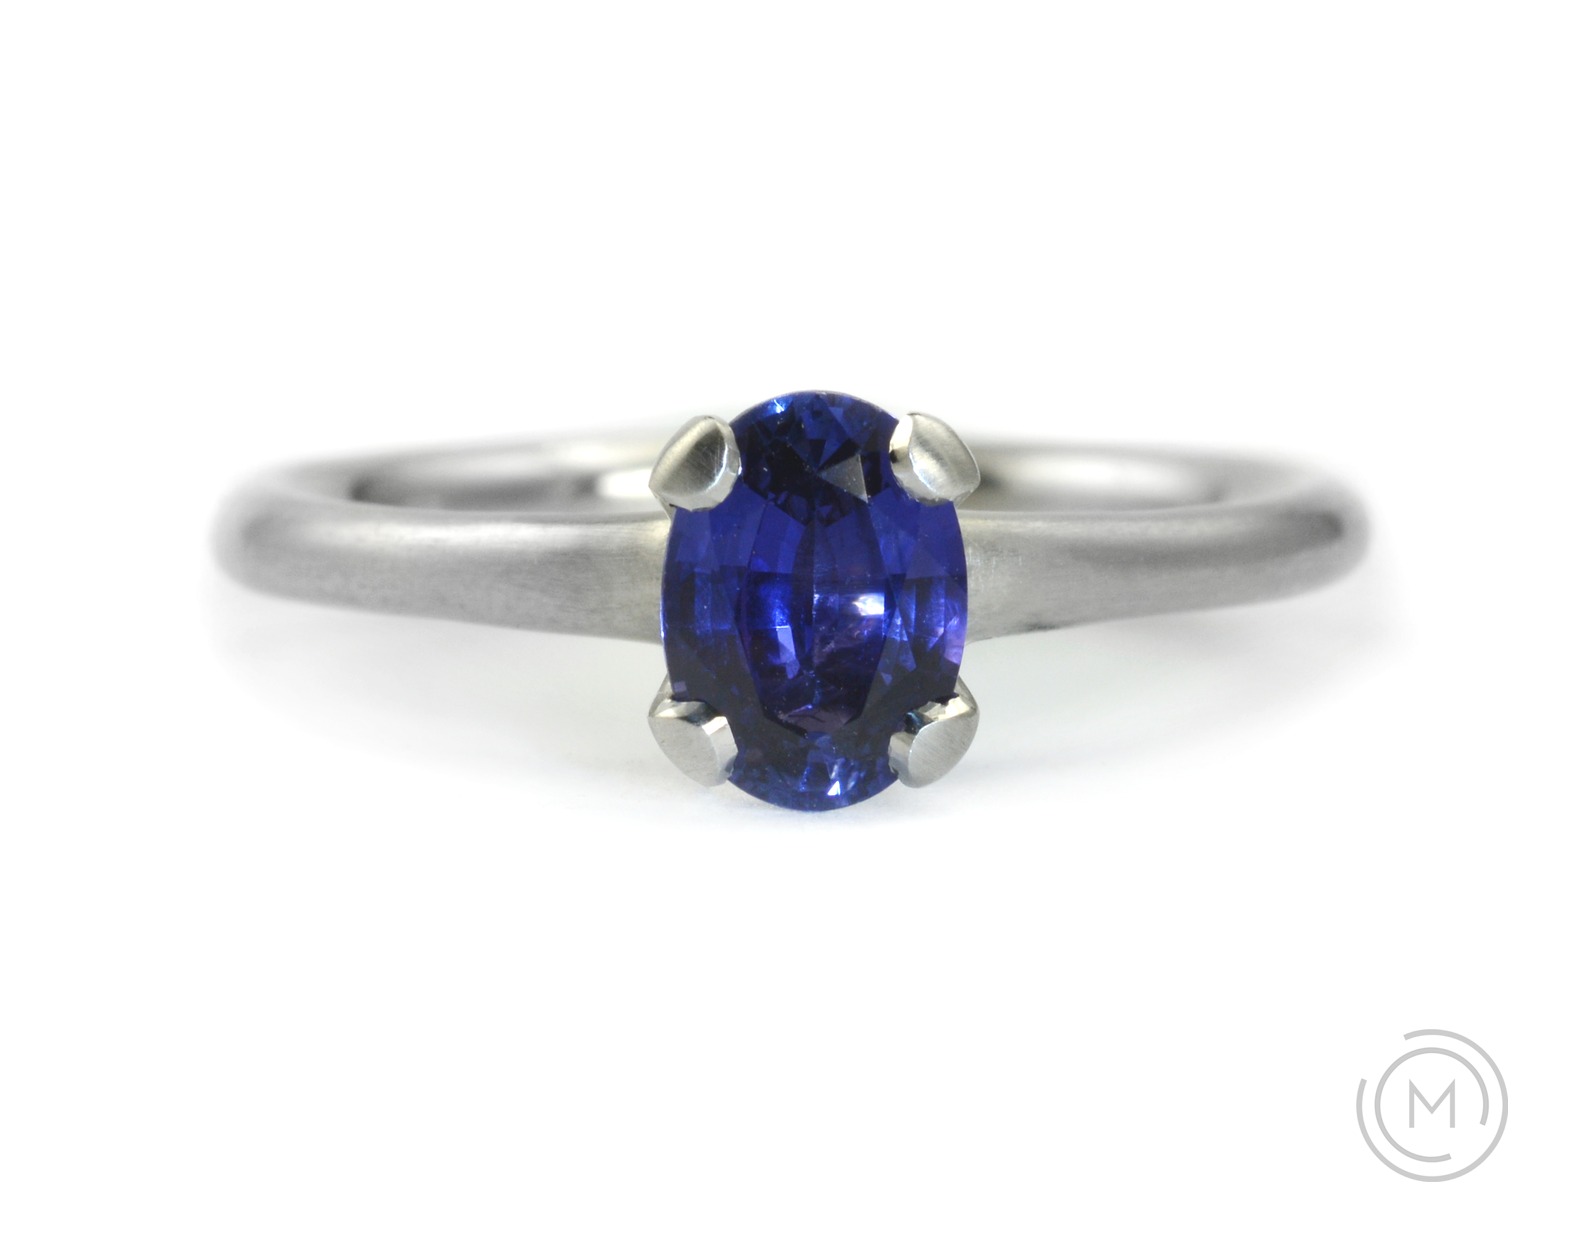 Oval sapphire and platinum 4-claw engagement ring